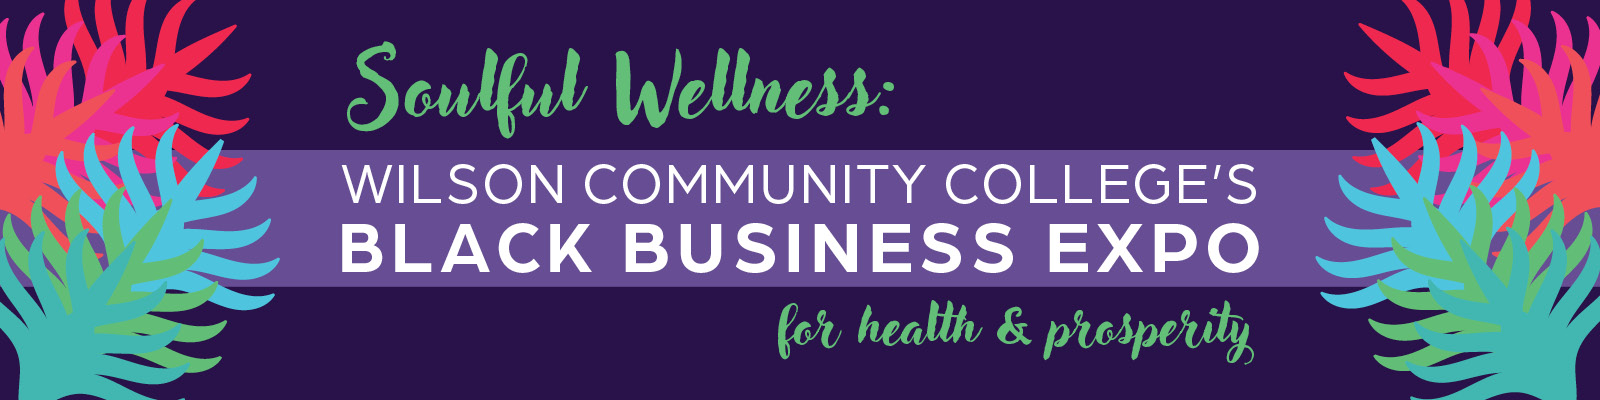 Soulful Wellness: Wilson Community College's Black Business Expo for Health & Prosperity